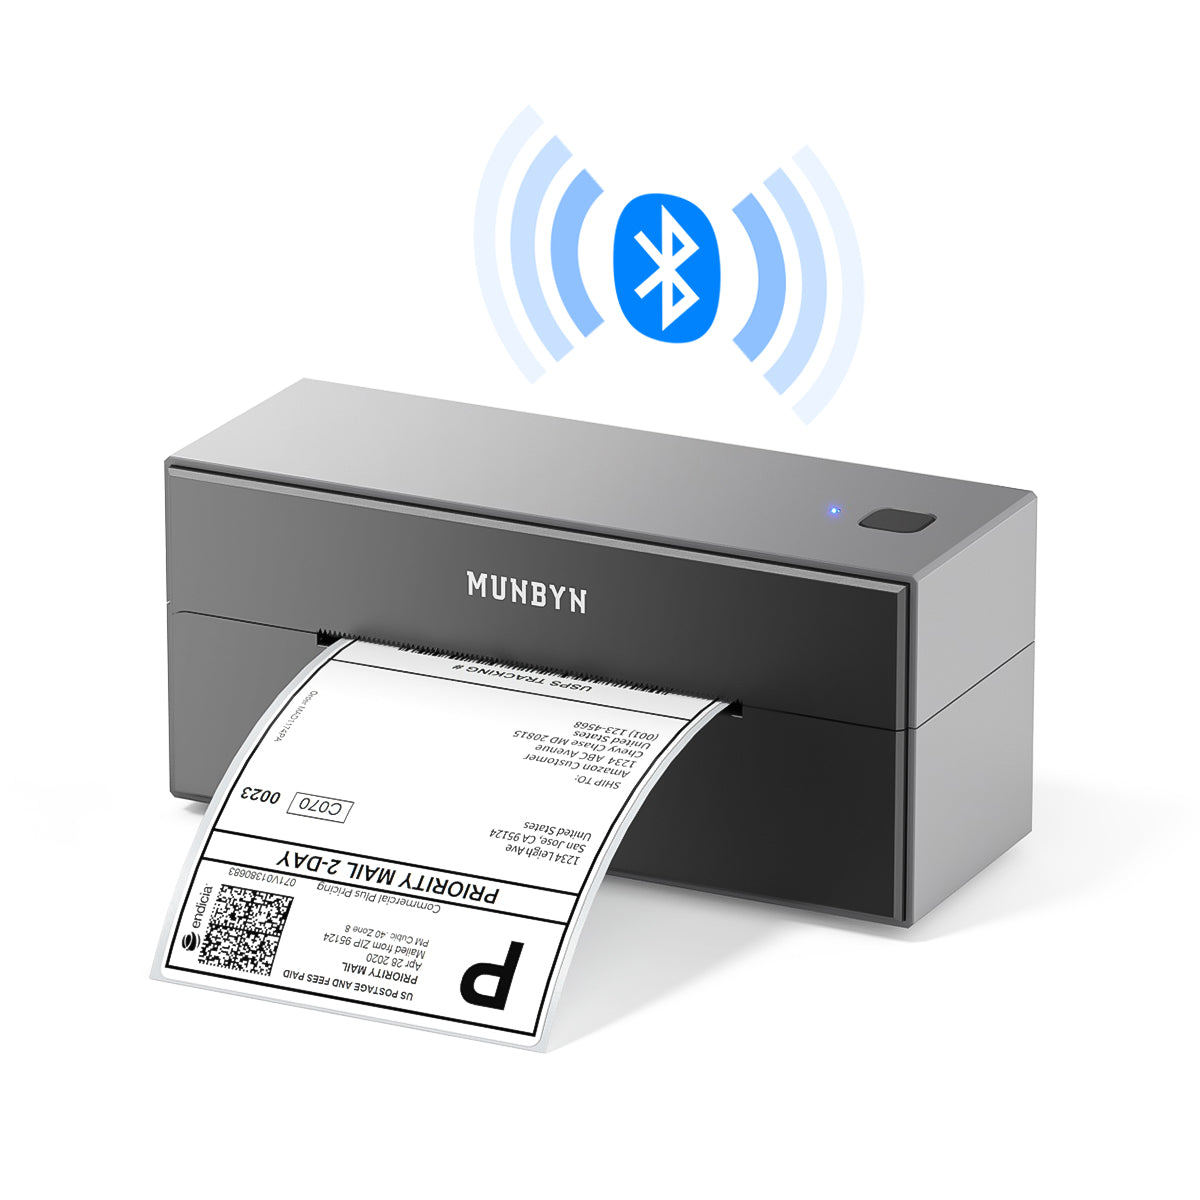 The MUNBYN ITPP129 Bluetooth thermal label printer 